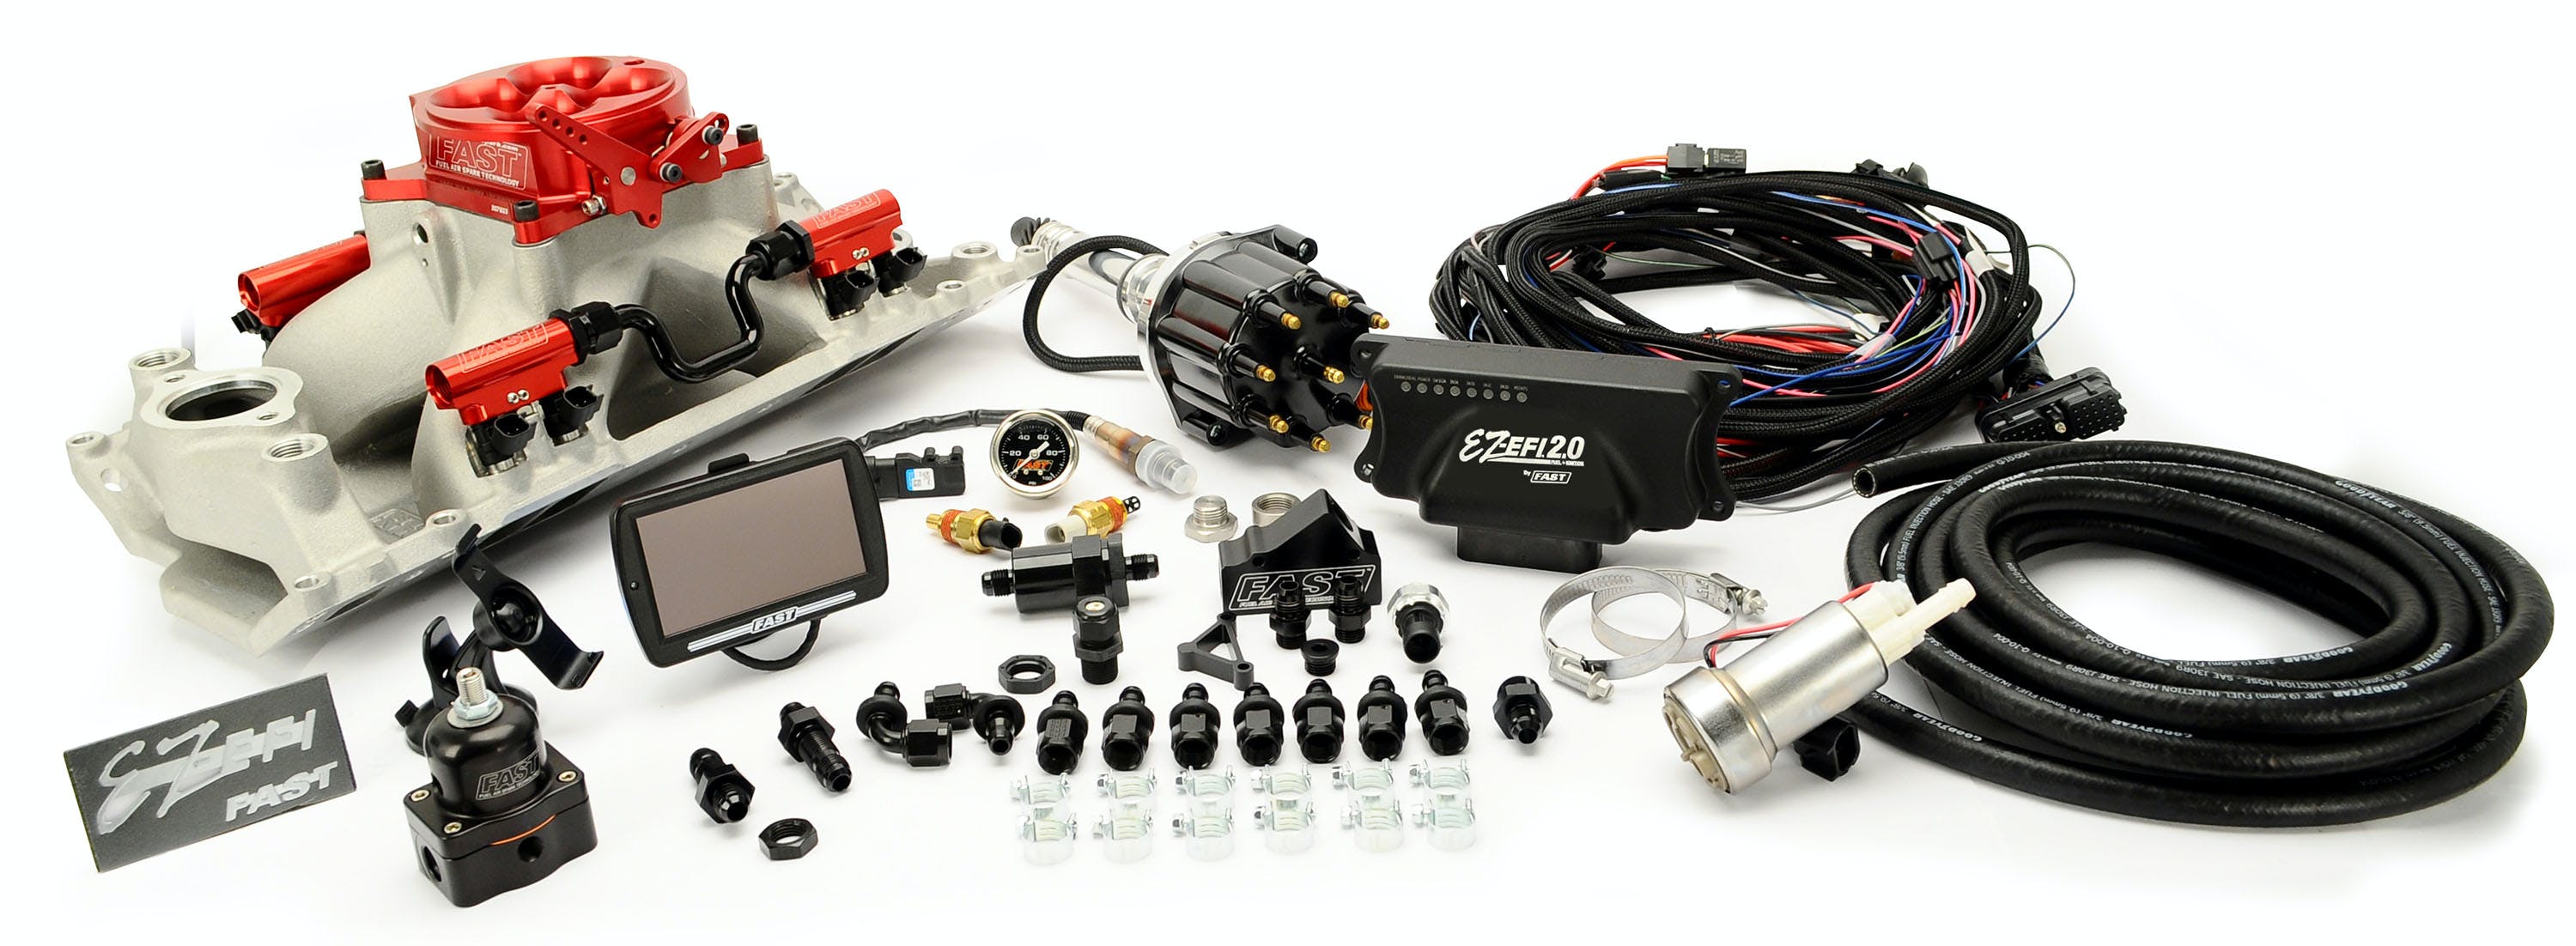 FAST - Fuel Air Spark Technology 30435-10T EZ 2.0 351W Multiport w/intake, rails, throttle body, distributor and fuel pump